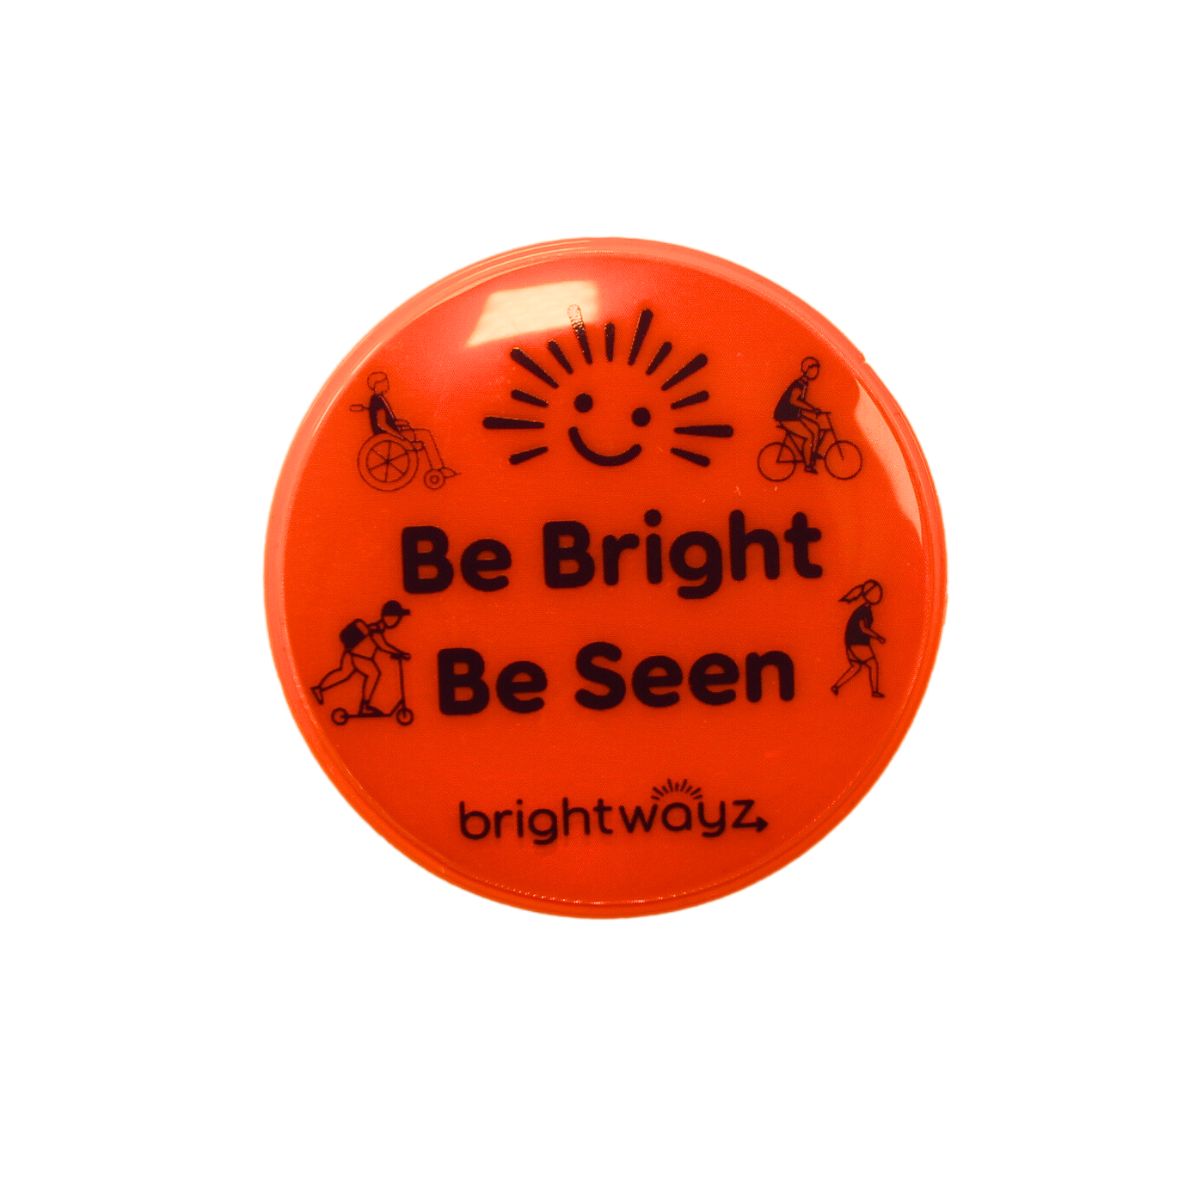 Be Bright Be Seen Badge.